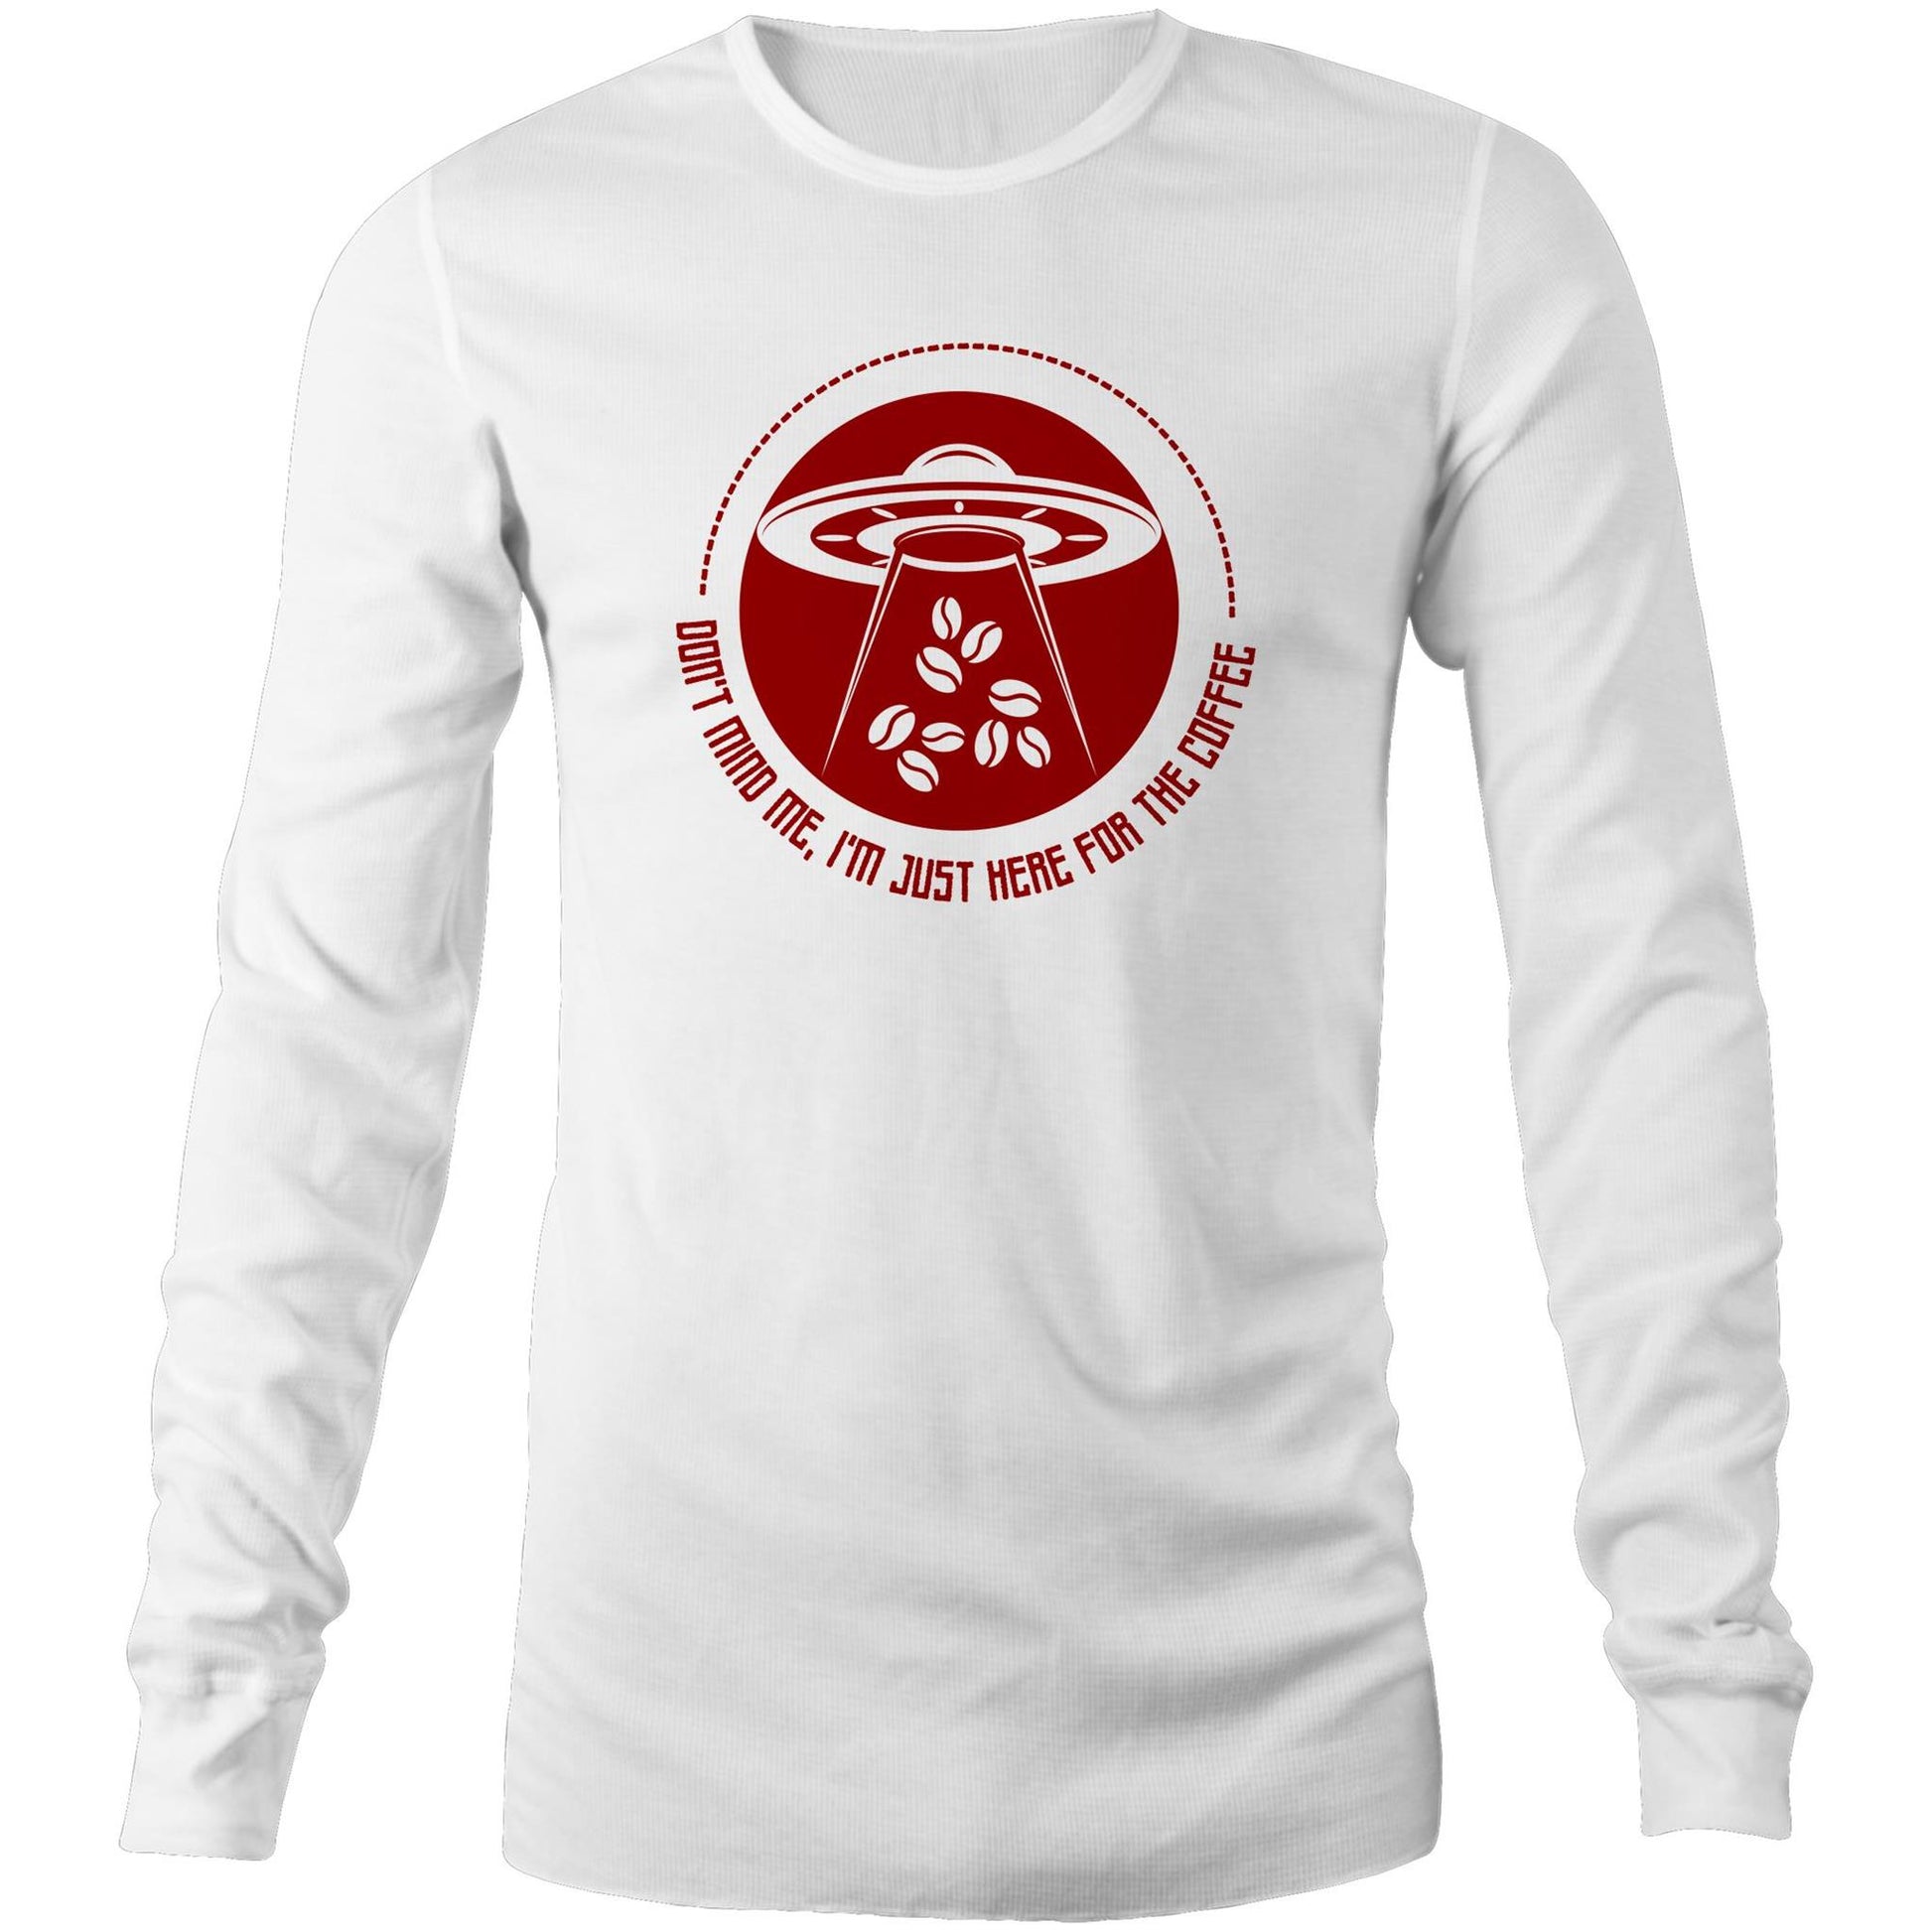 Don't Mind Me, I'm Just Here For The Coffee, Alien UFO - Mens Long Sleeve T-Shirt White Unisex Long Sleeve T-shirt Coffee Sci Fi